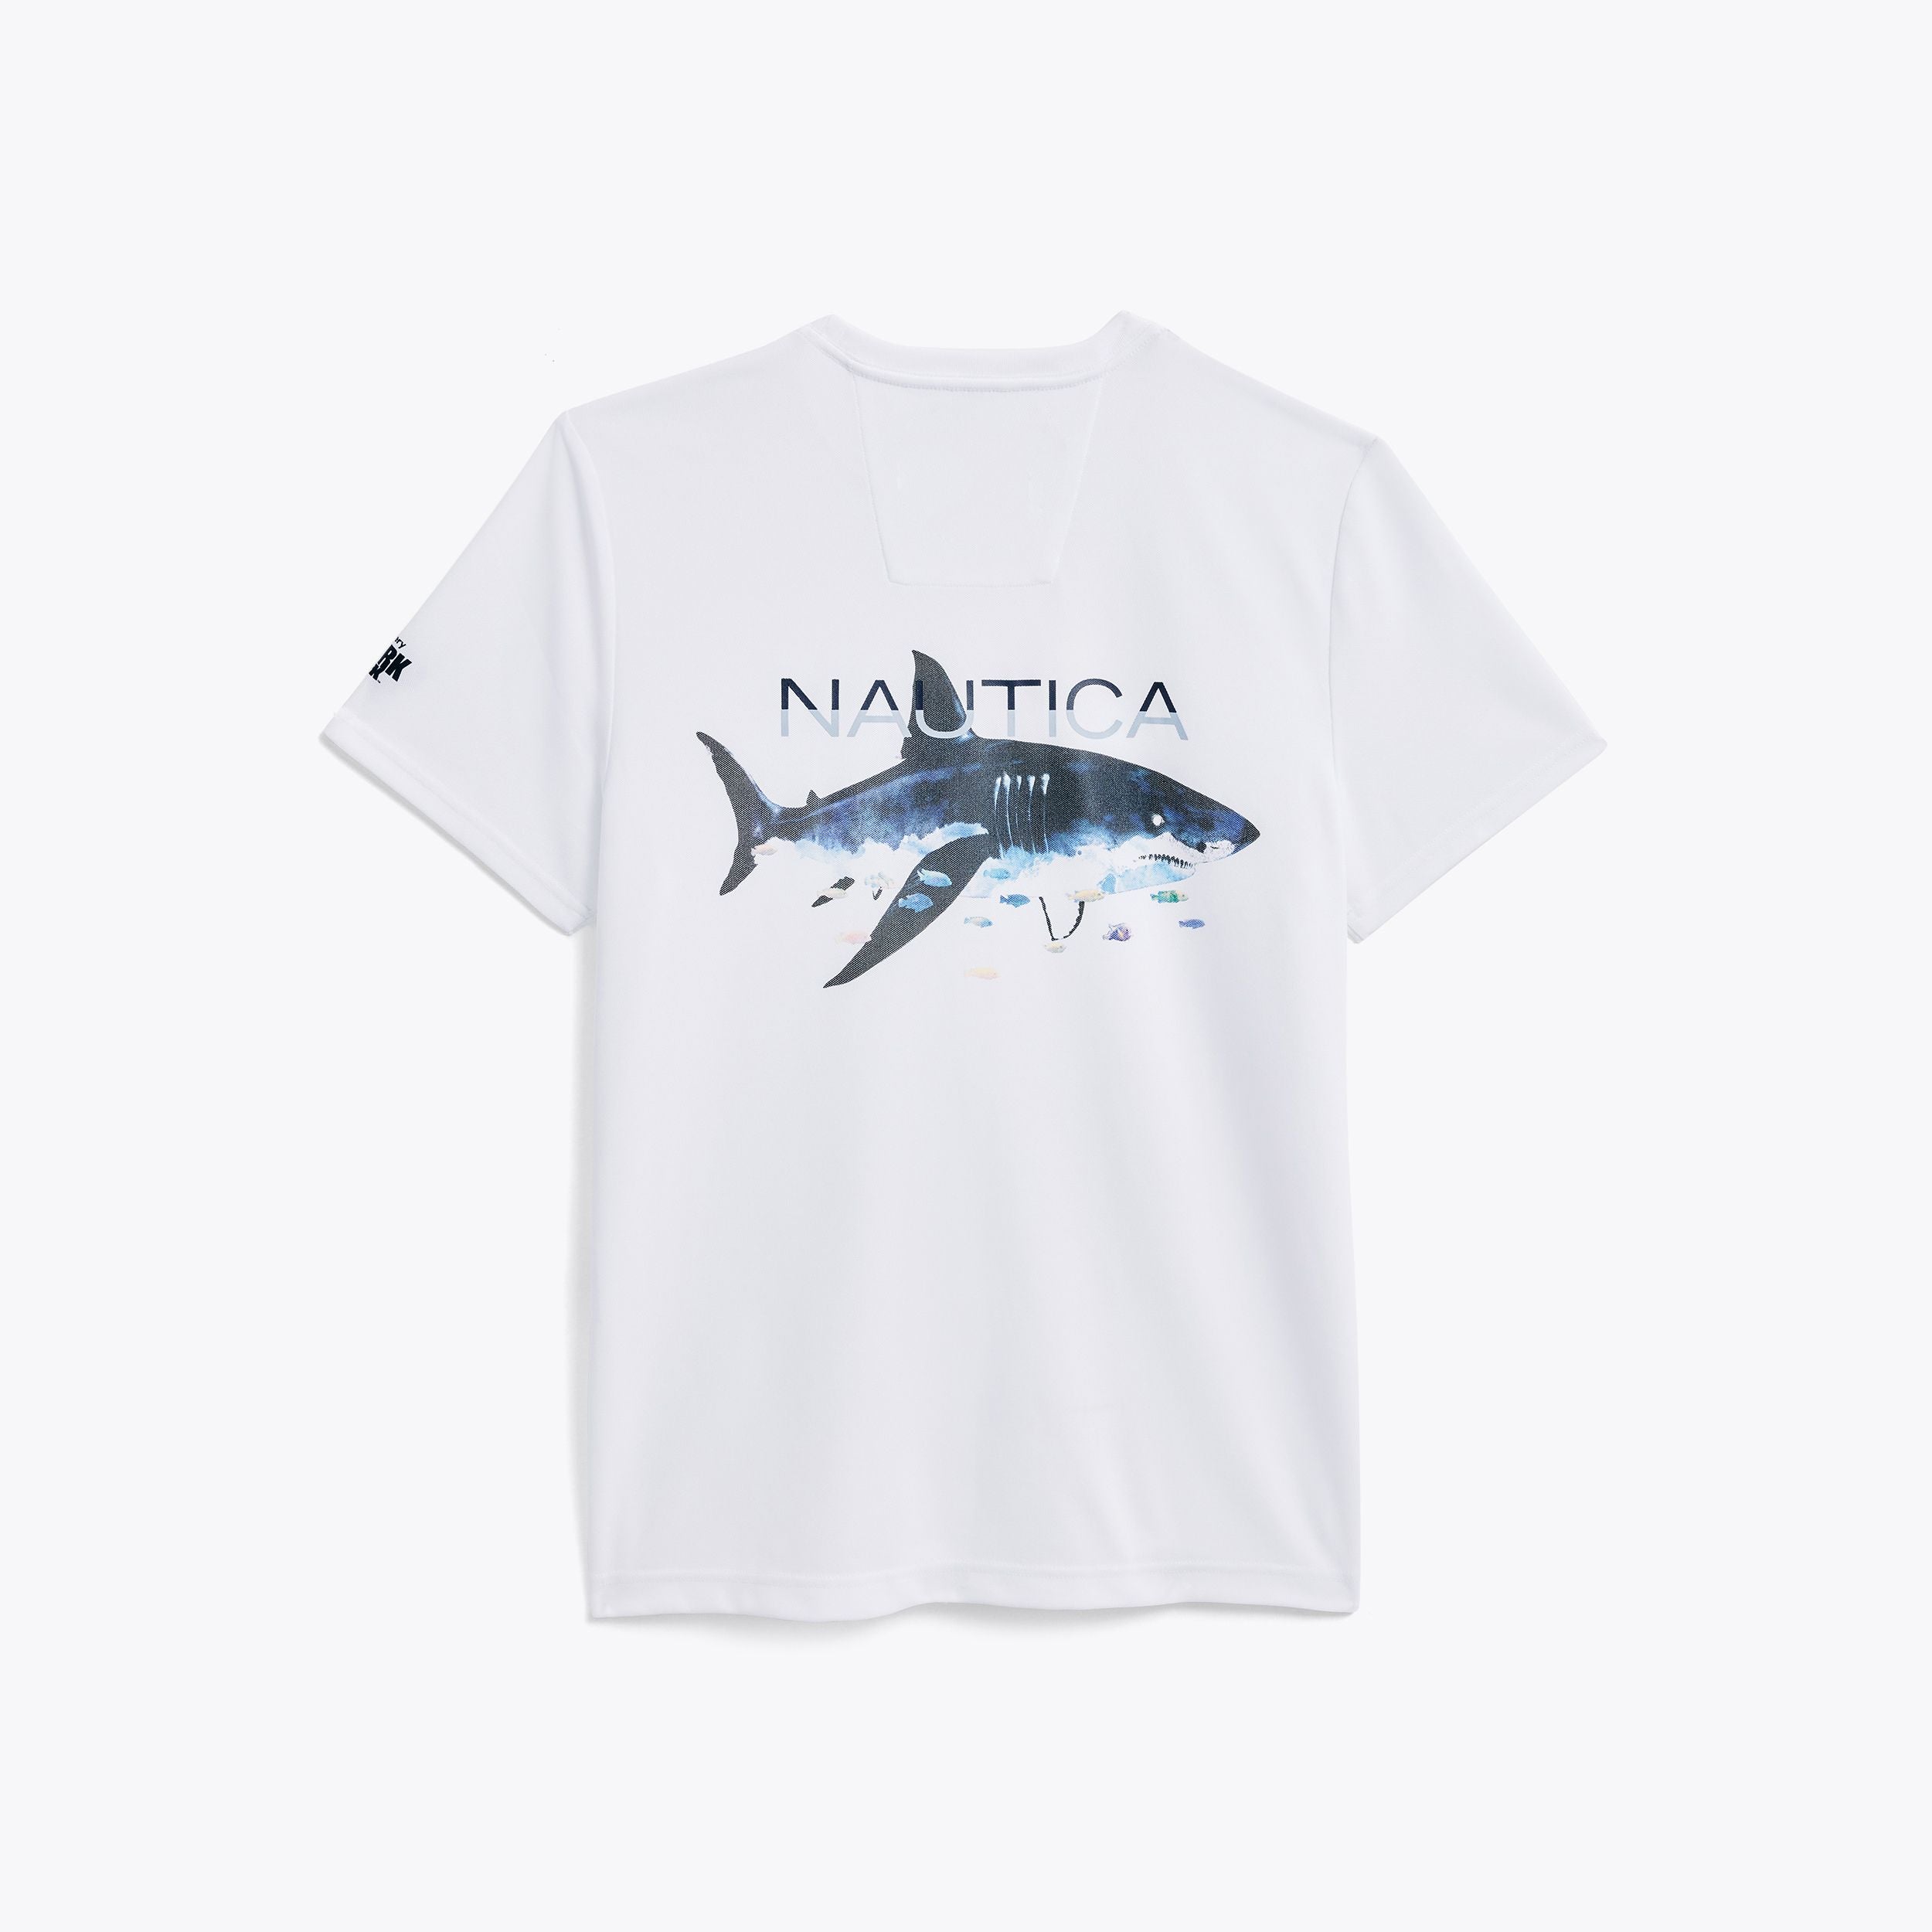 NAUTICA X Shark Week SUSTAINABLY CRAFTED SHARK GRAPHIC BACK T-SHIRT IN WHITE